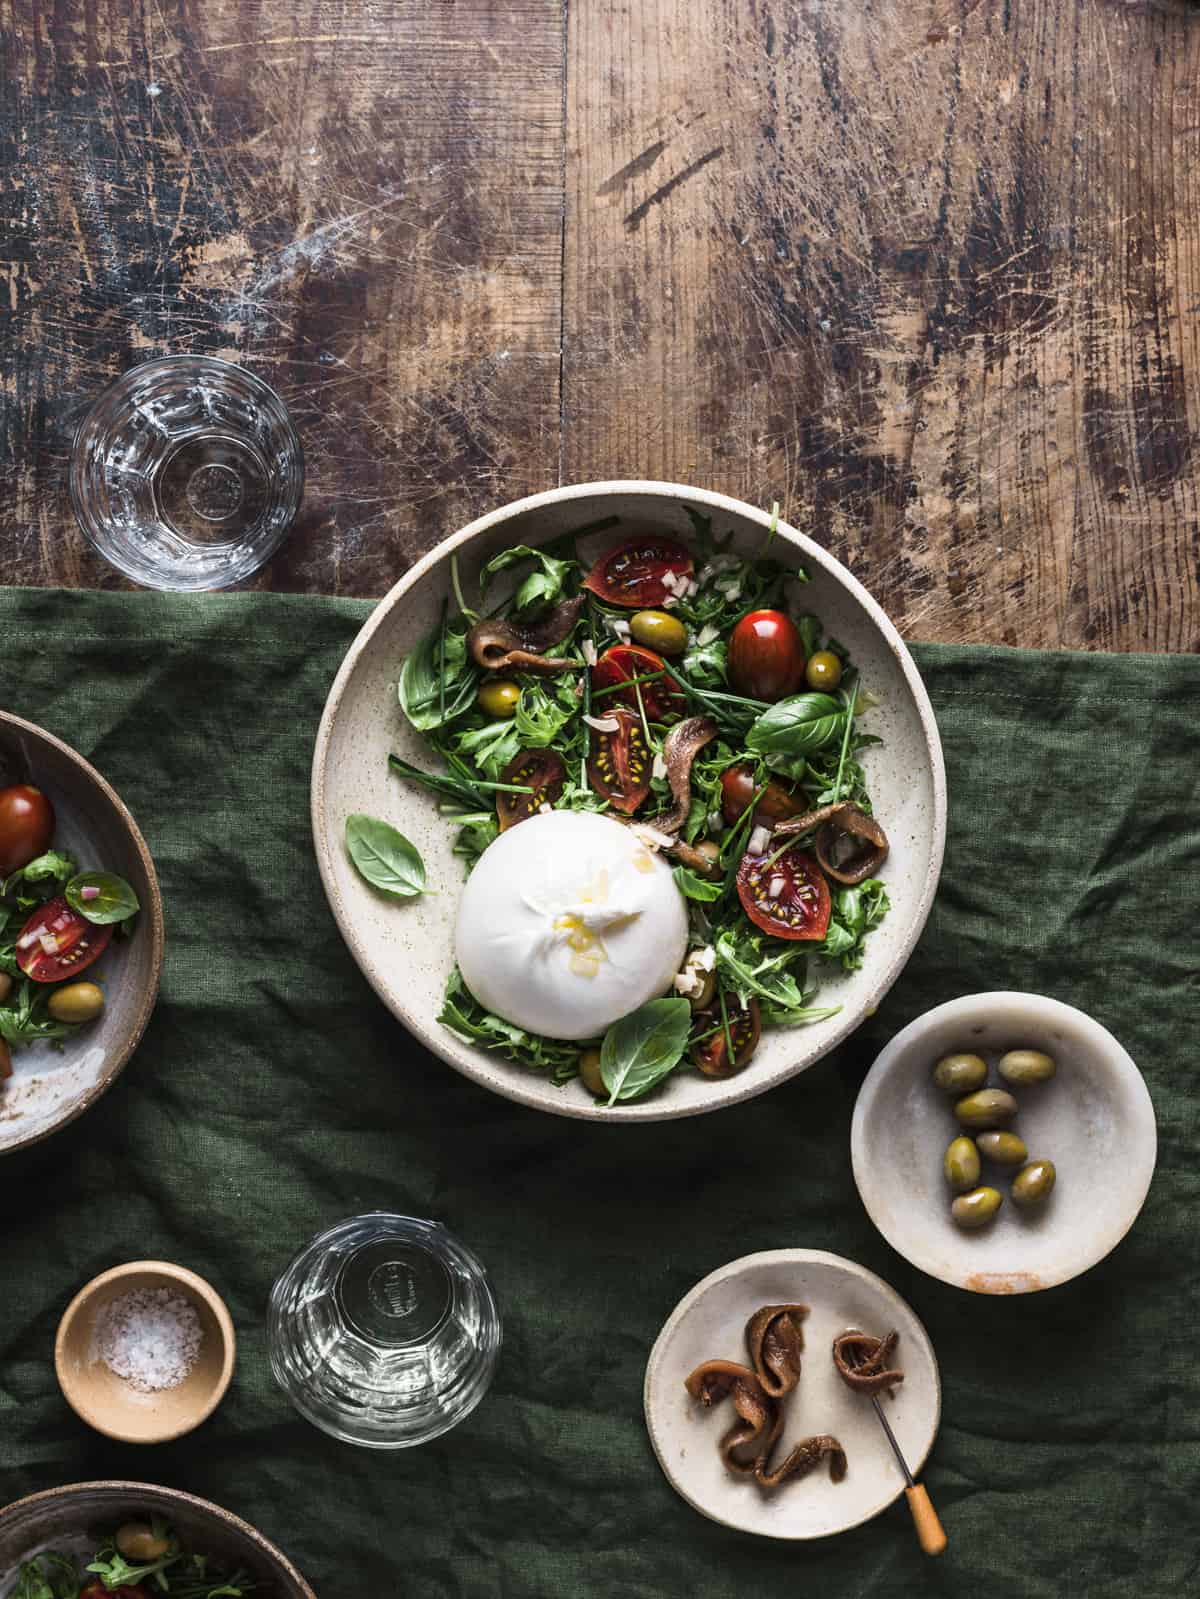 Overhead shot showcasing a salad bowl full of burrata, arugula, tomatoes, olives, and anchovies on a green linen tablecloth with other bowls and glasses around.